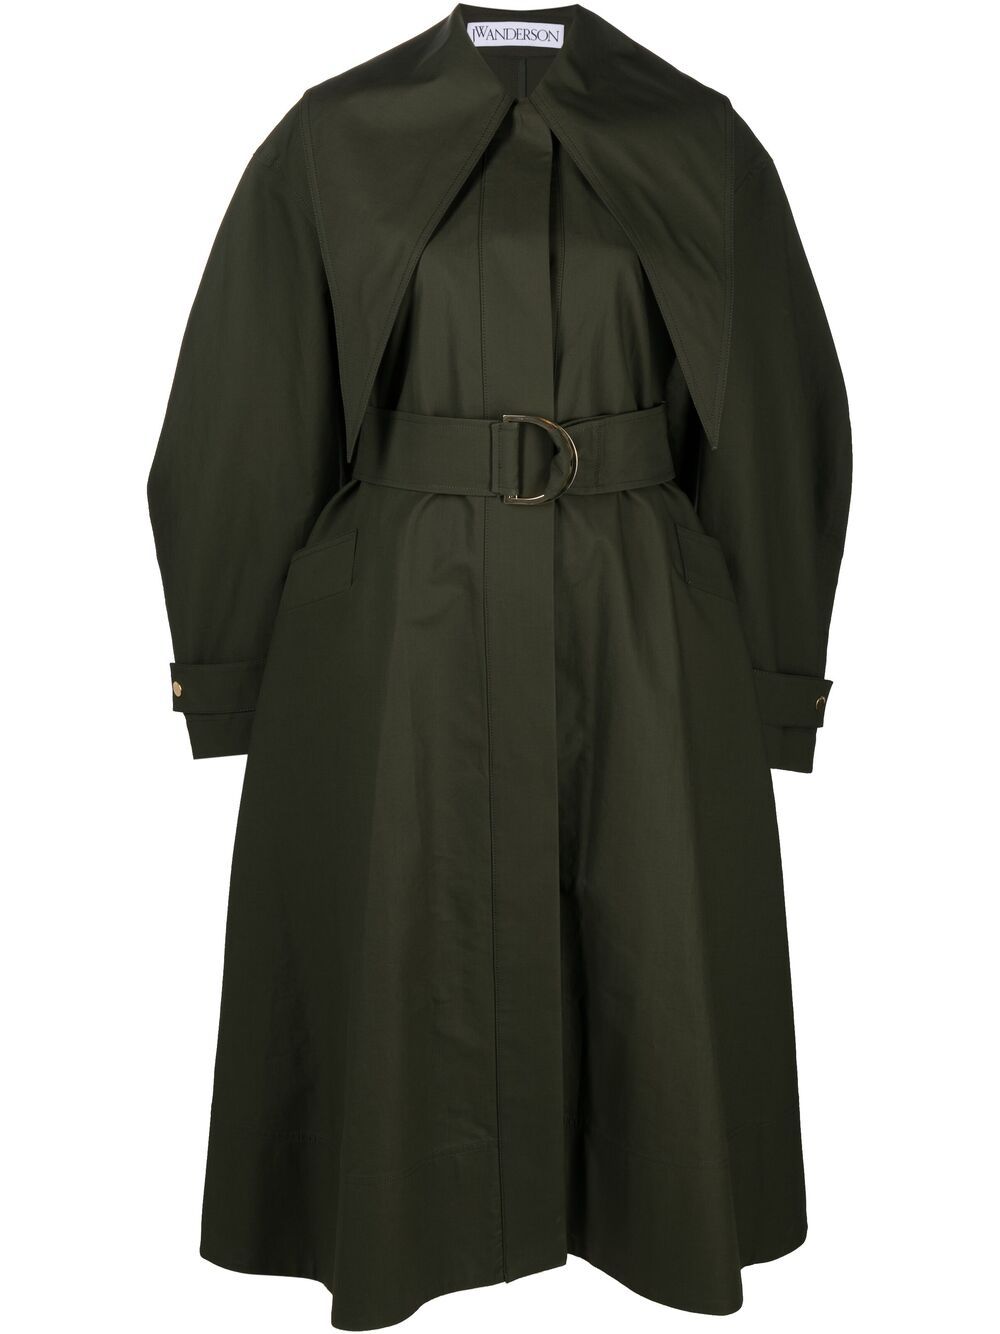 JW ANDERSON BELTED TRENCH COAT